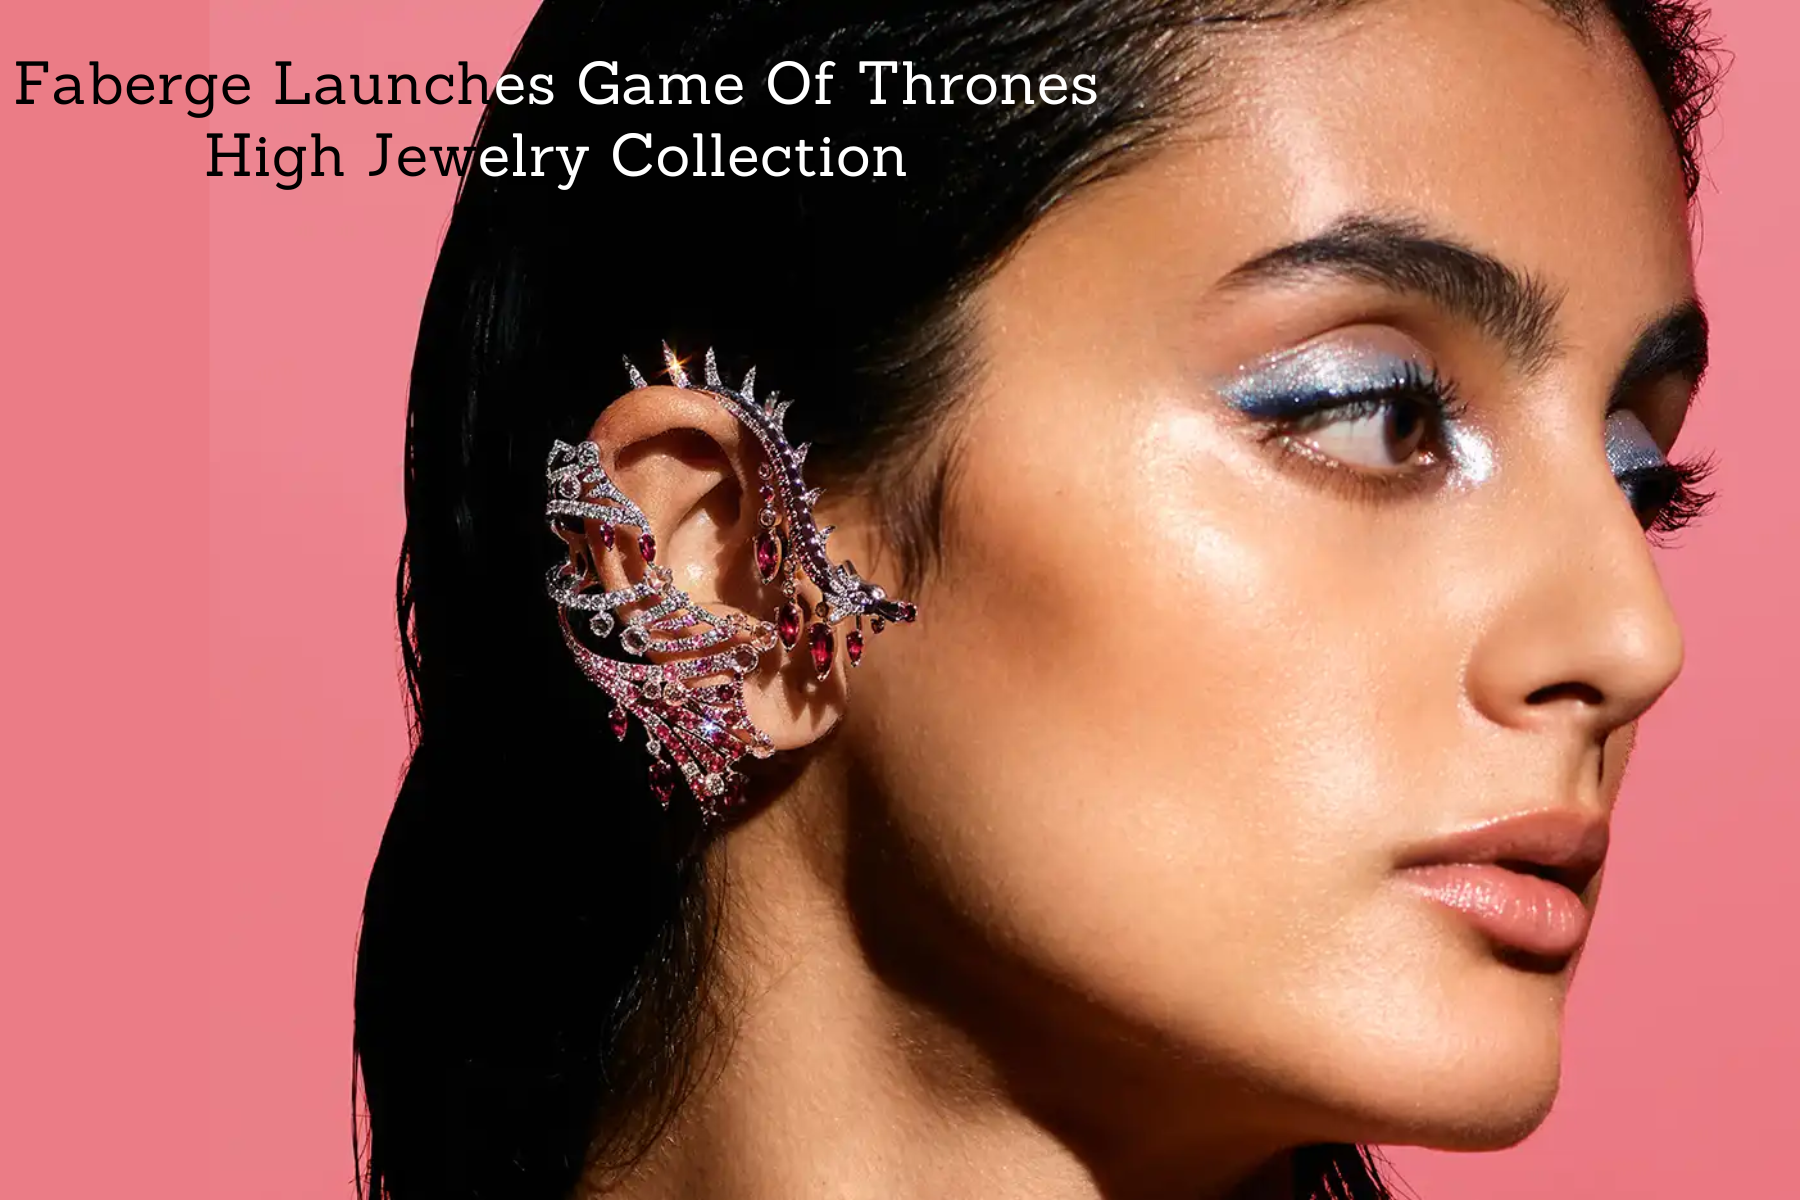 Faberge Launches Game Of Thrones High Jewelry Collection